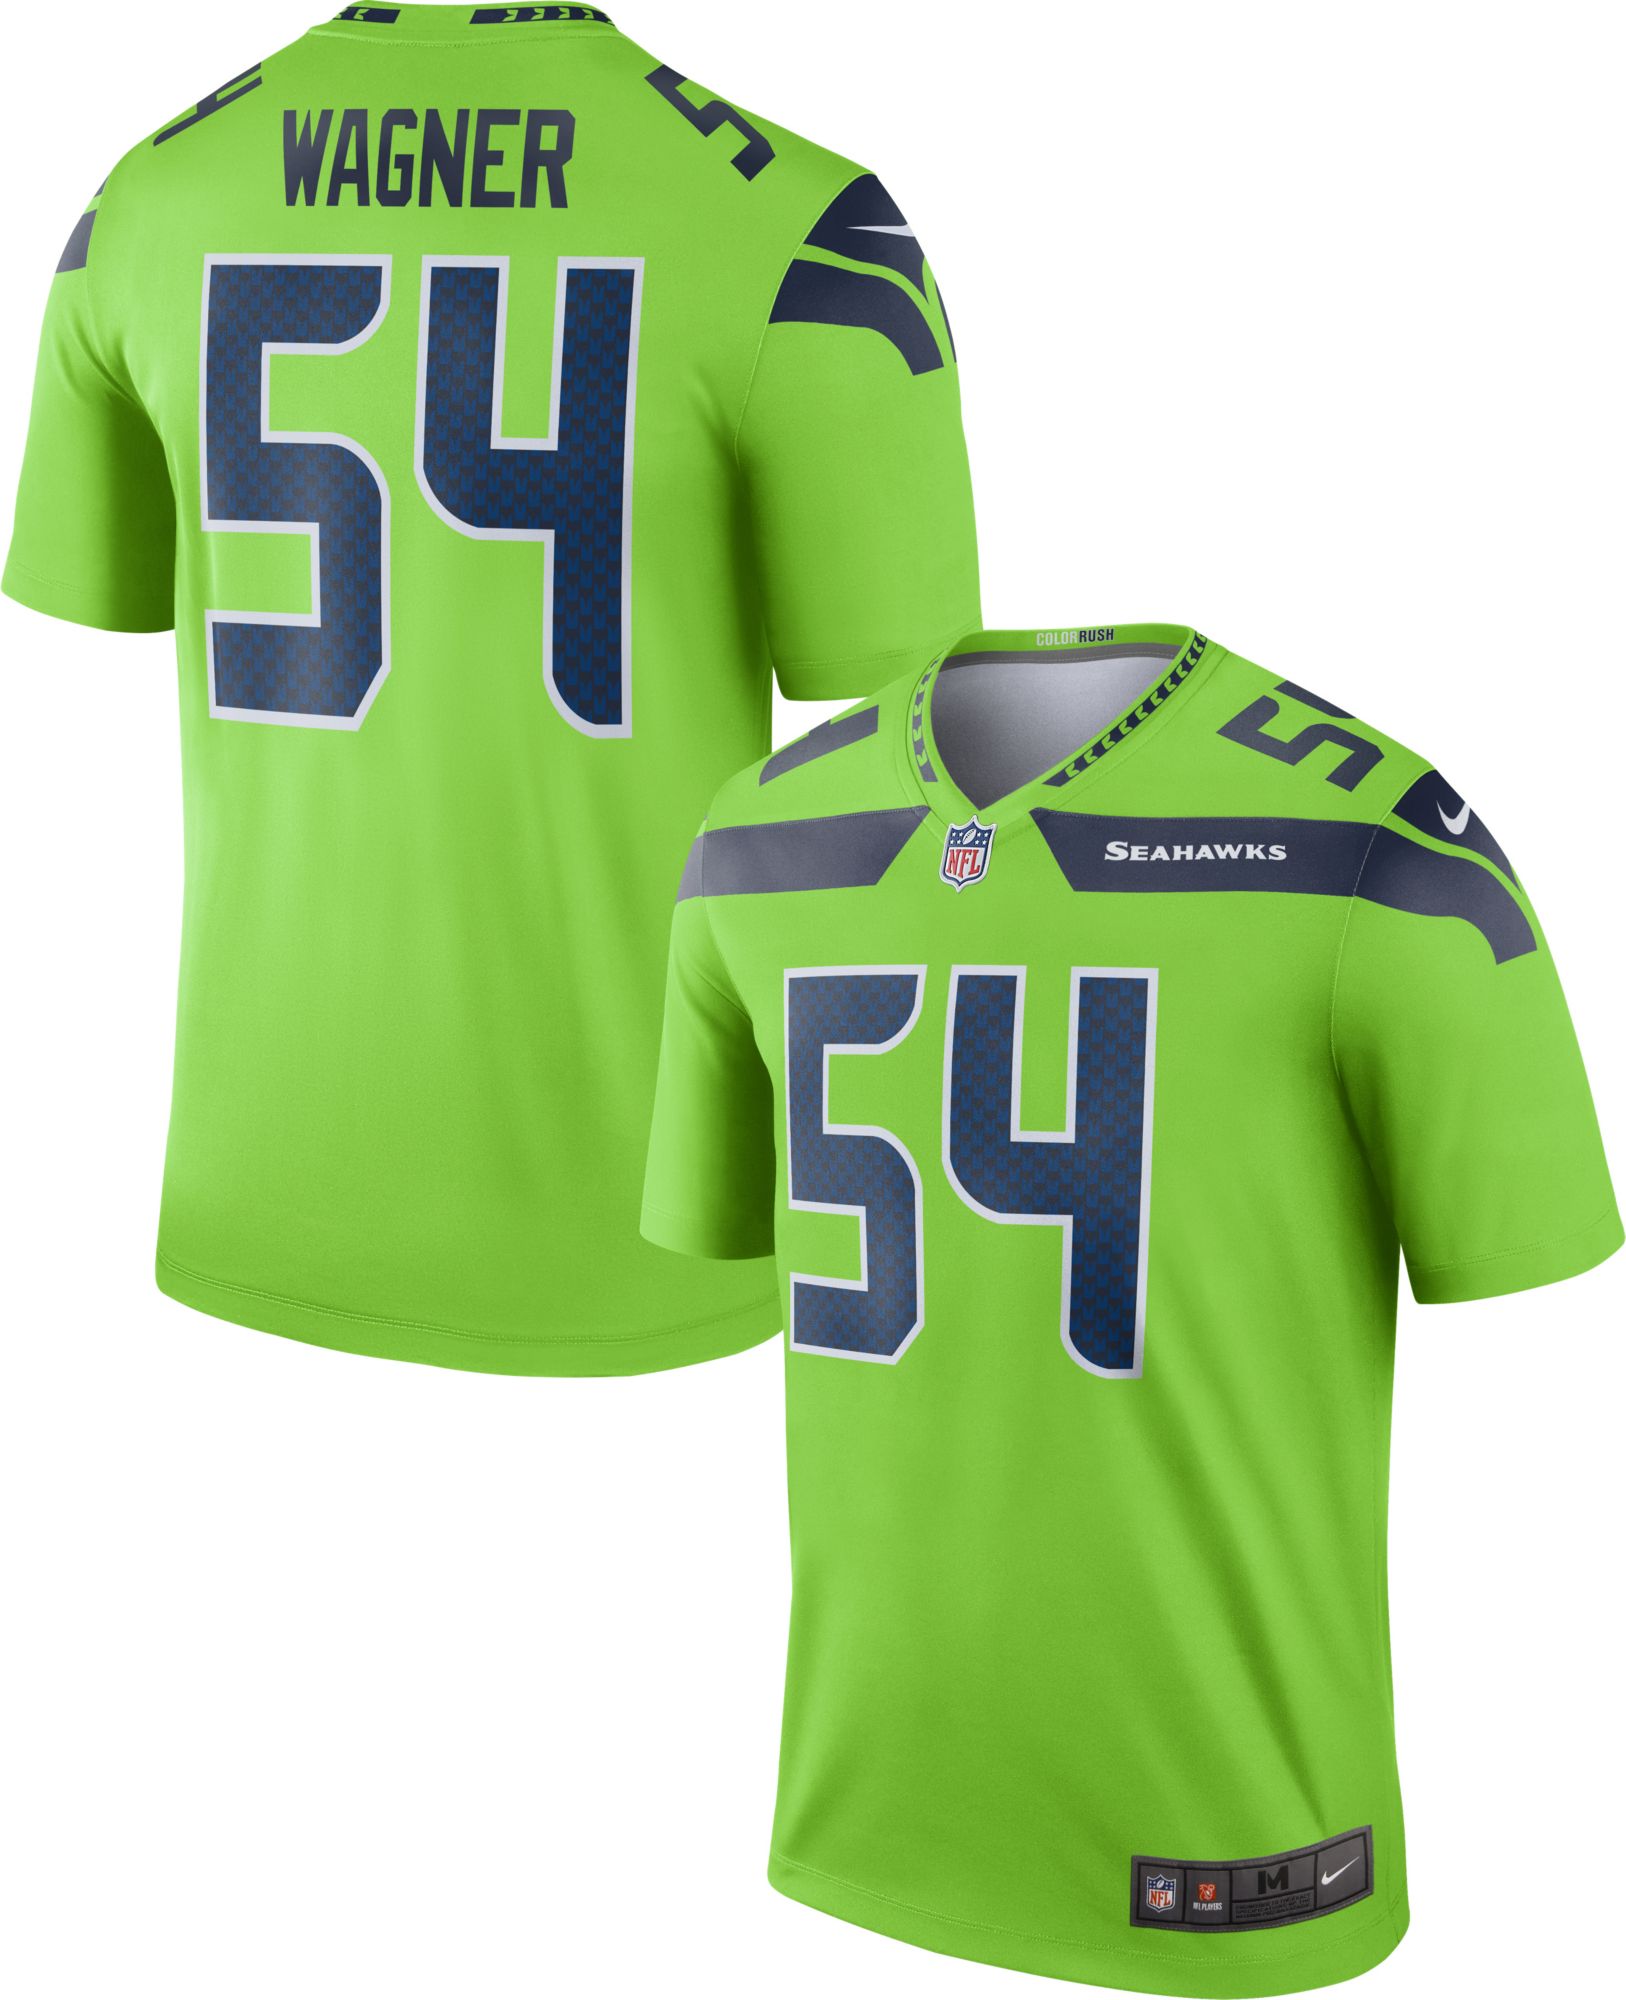 bobby wagner jersey green